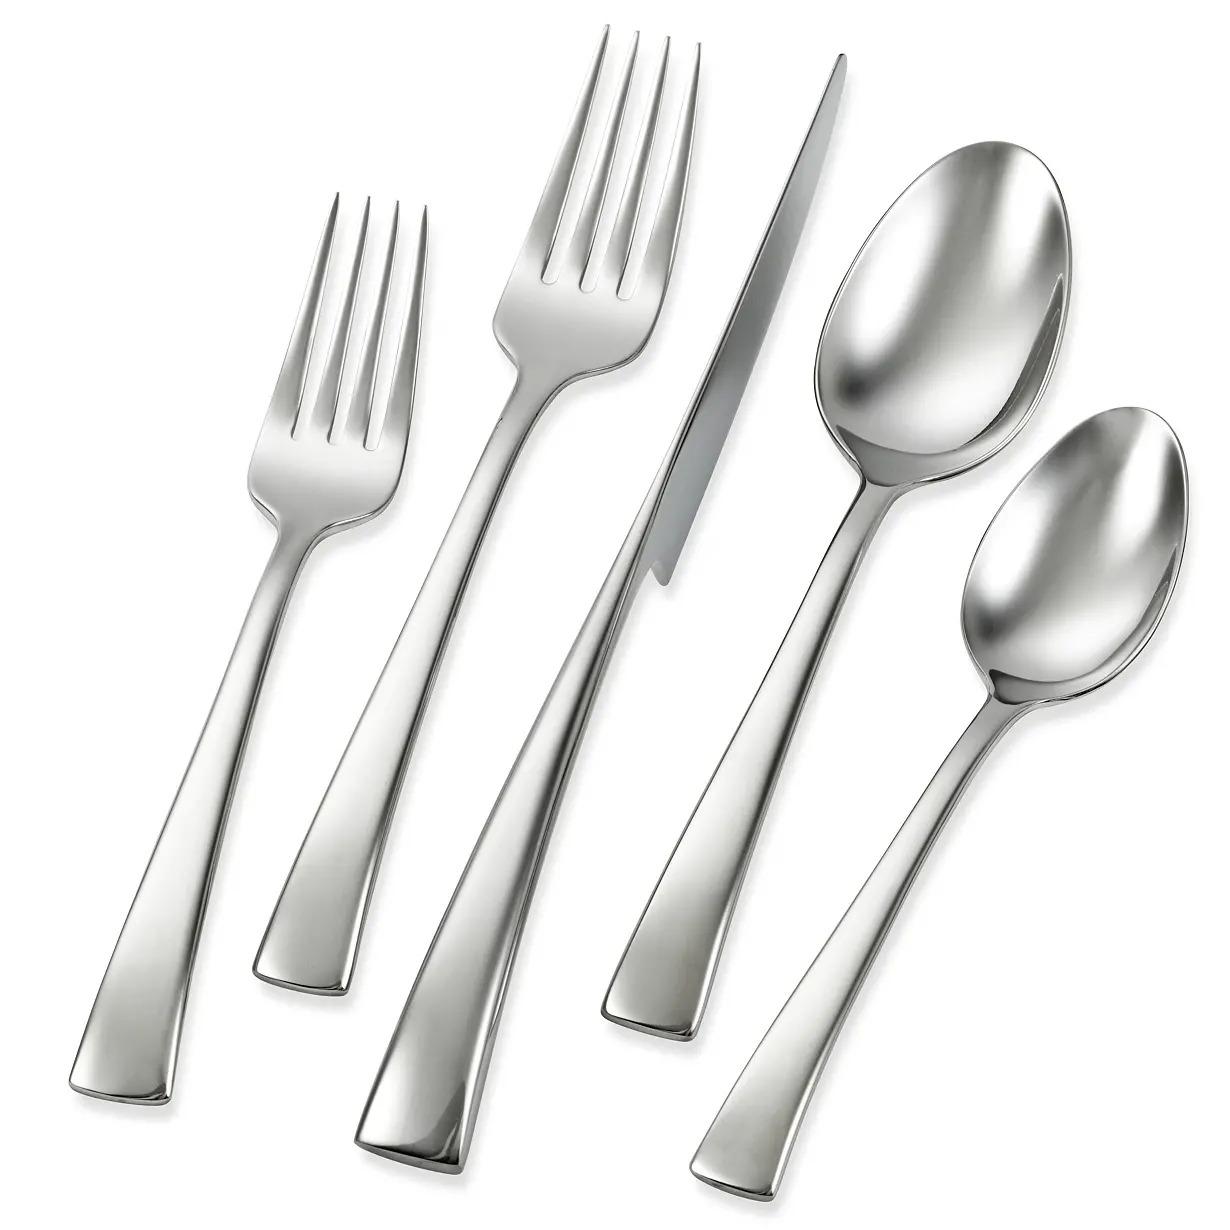 JA Henckels Zwilling 18/10 Stainless Steel Flatware Sets for $43.39 Shipped